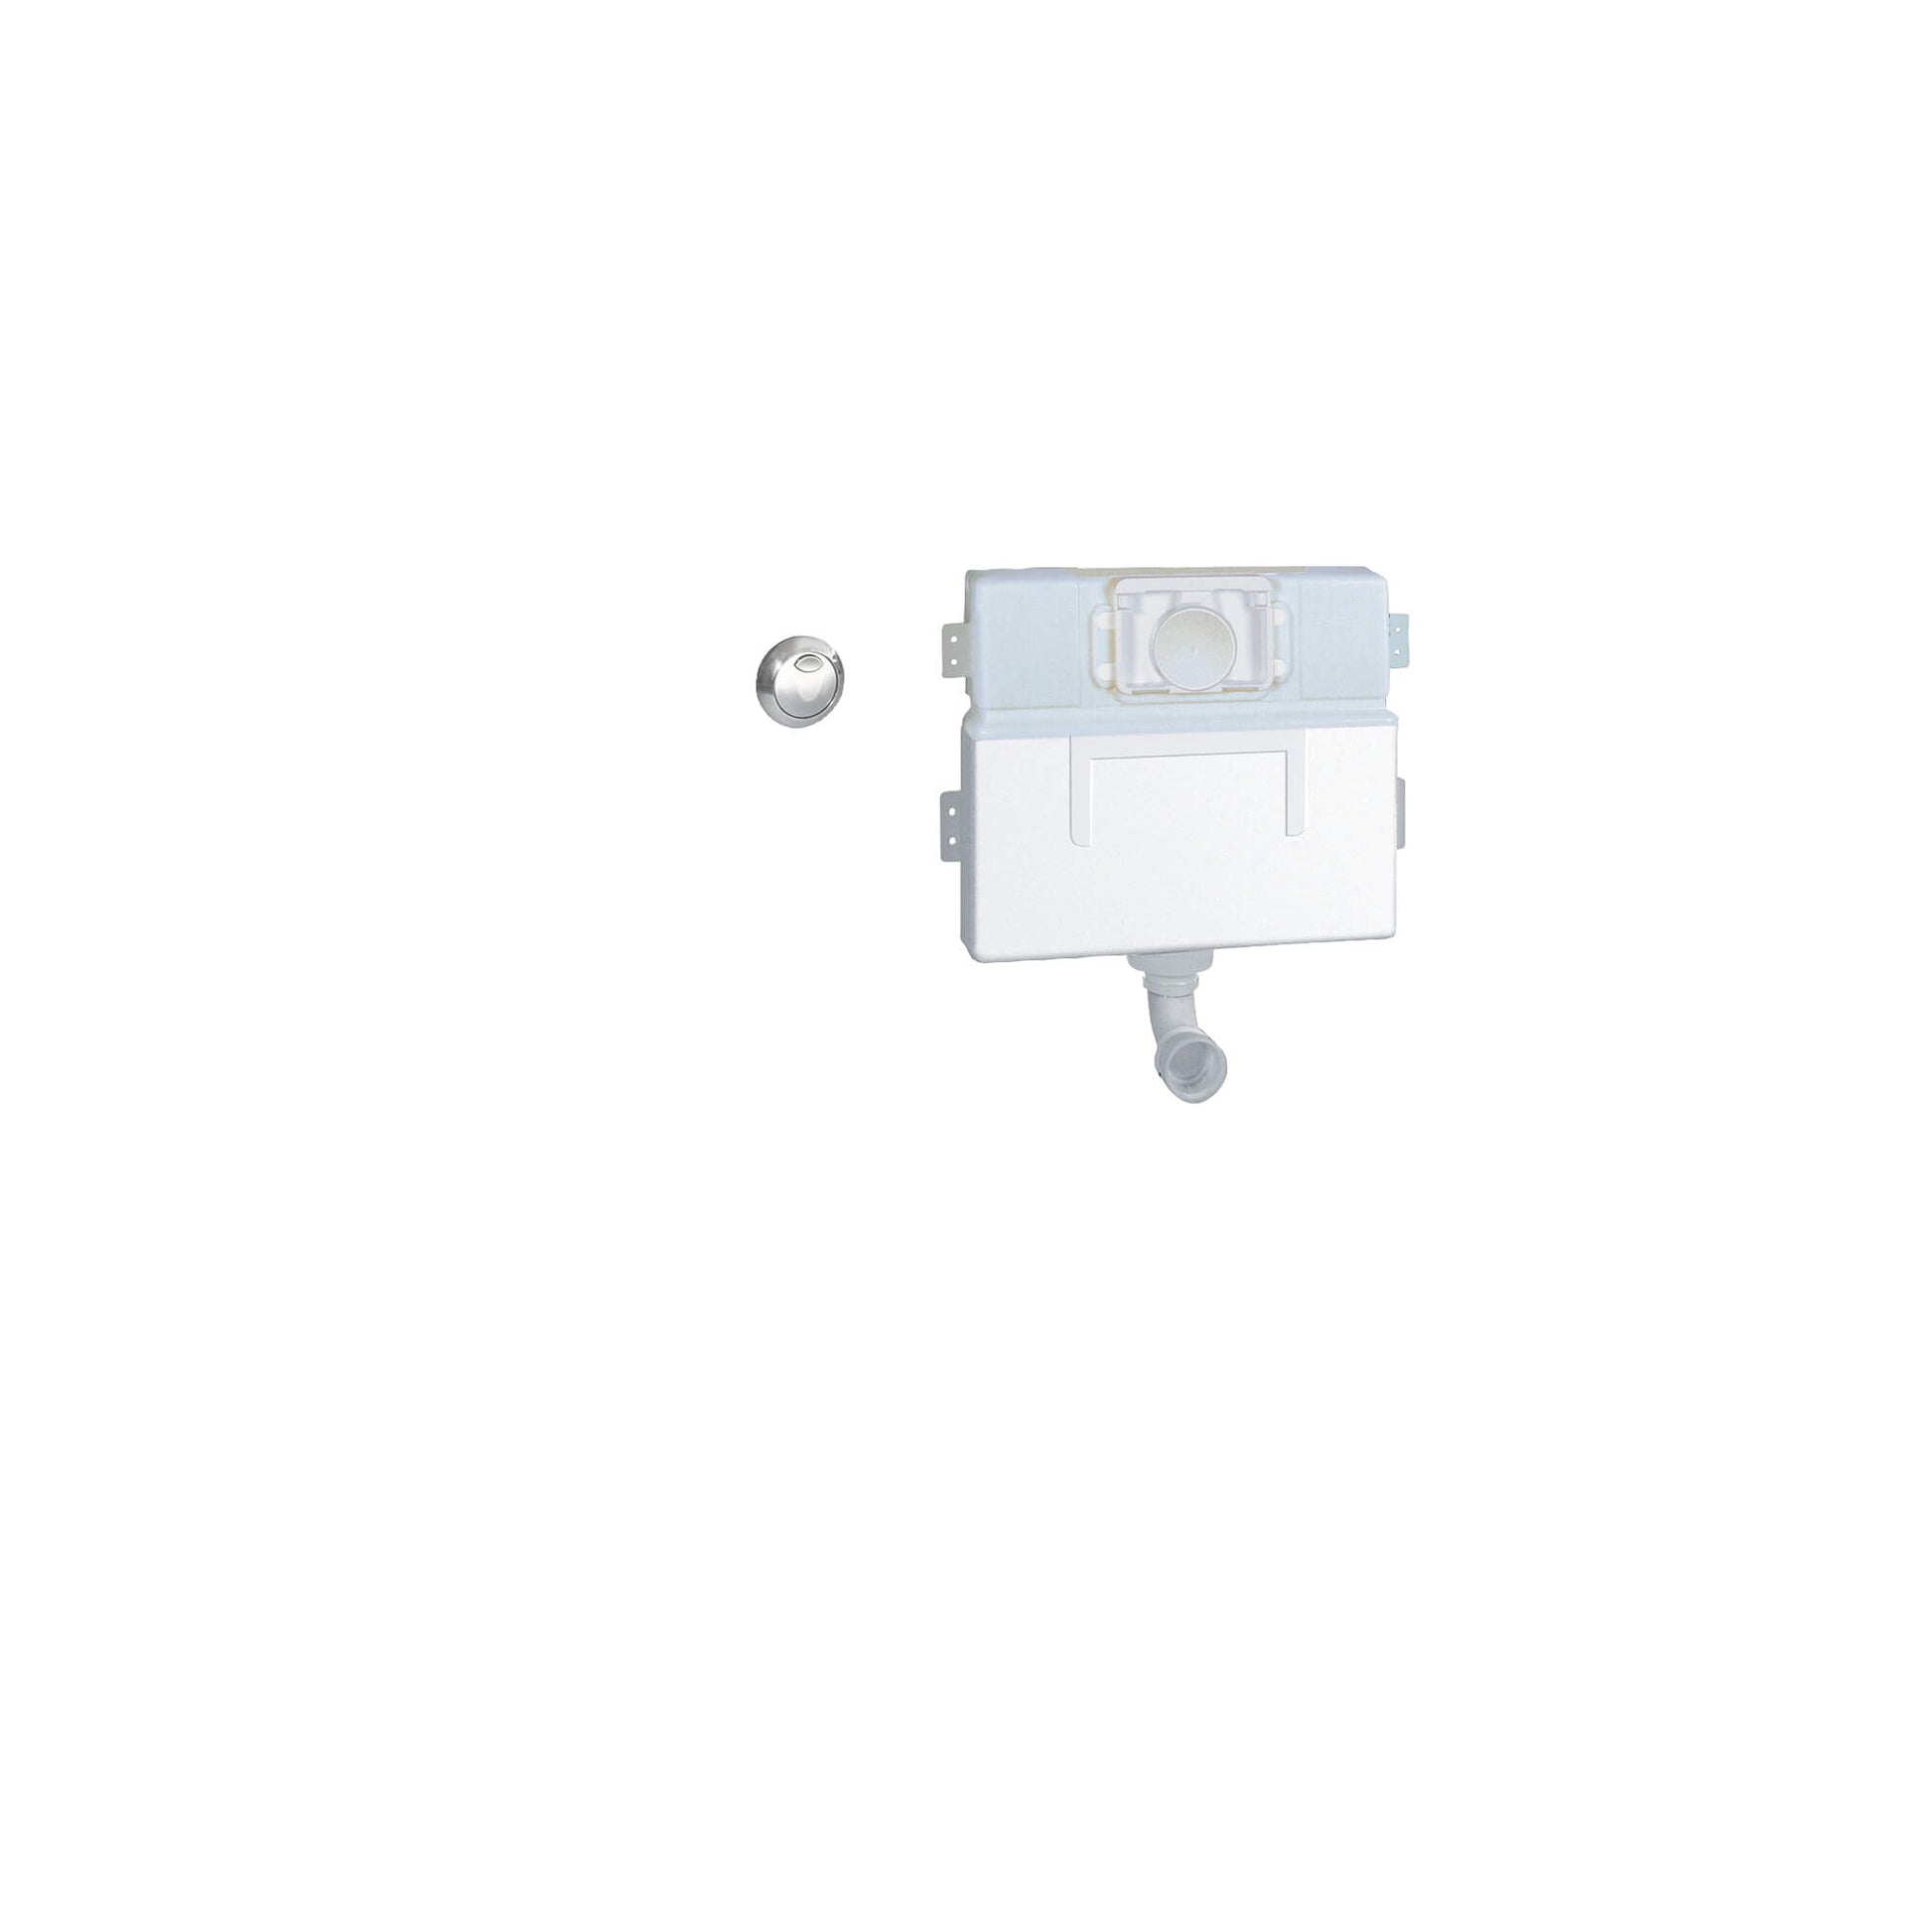 GROHE 38691000 Flushing Cistern Solo Chrome Wall Carrier Flushing Cistern